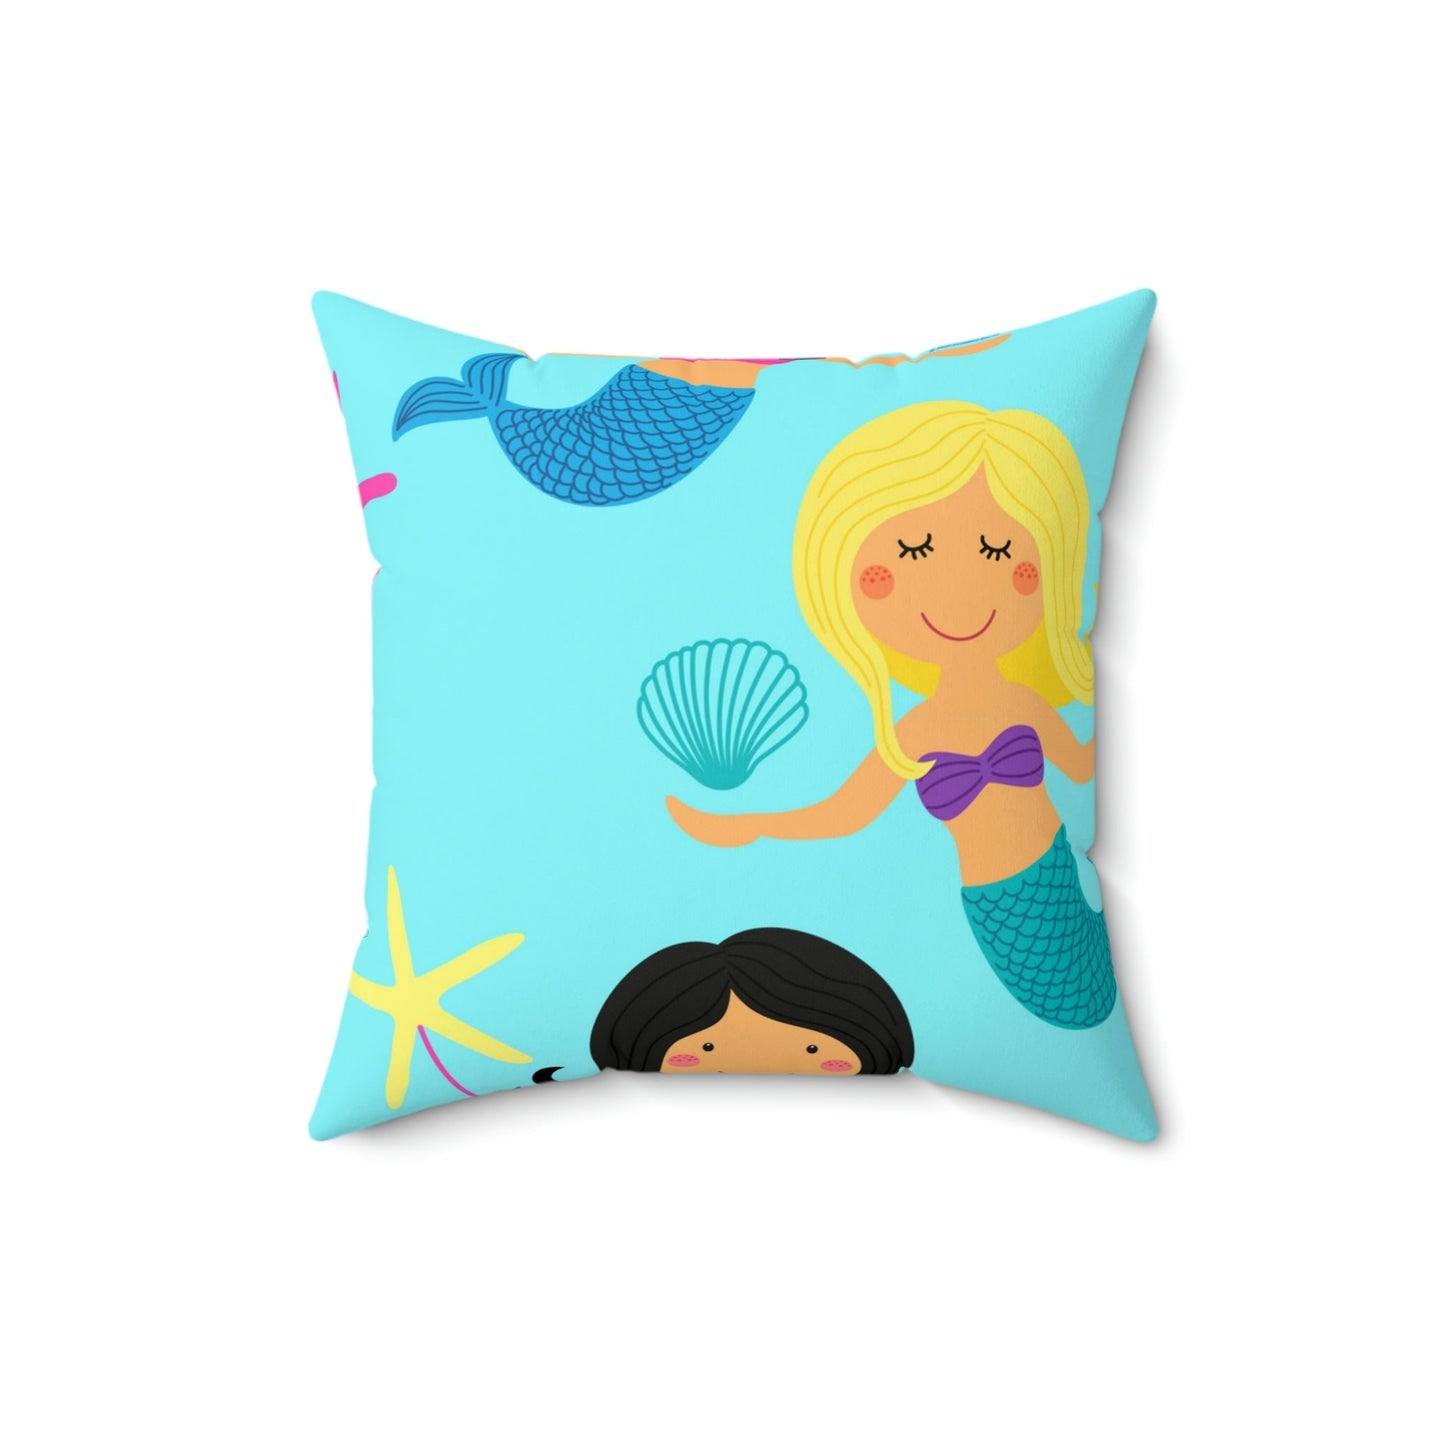 Dainty Little Mermaid Square Pillow Home Decor Pink Sweetheart